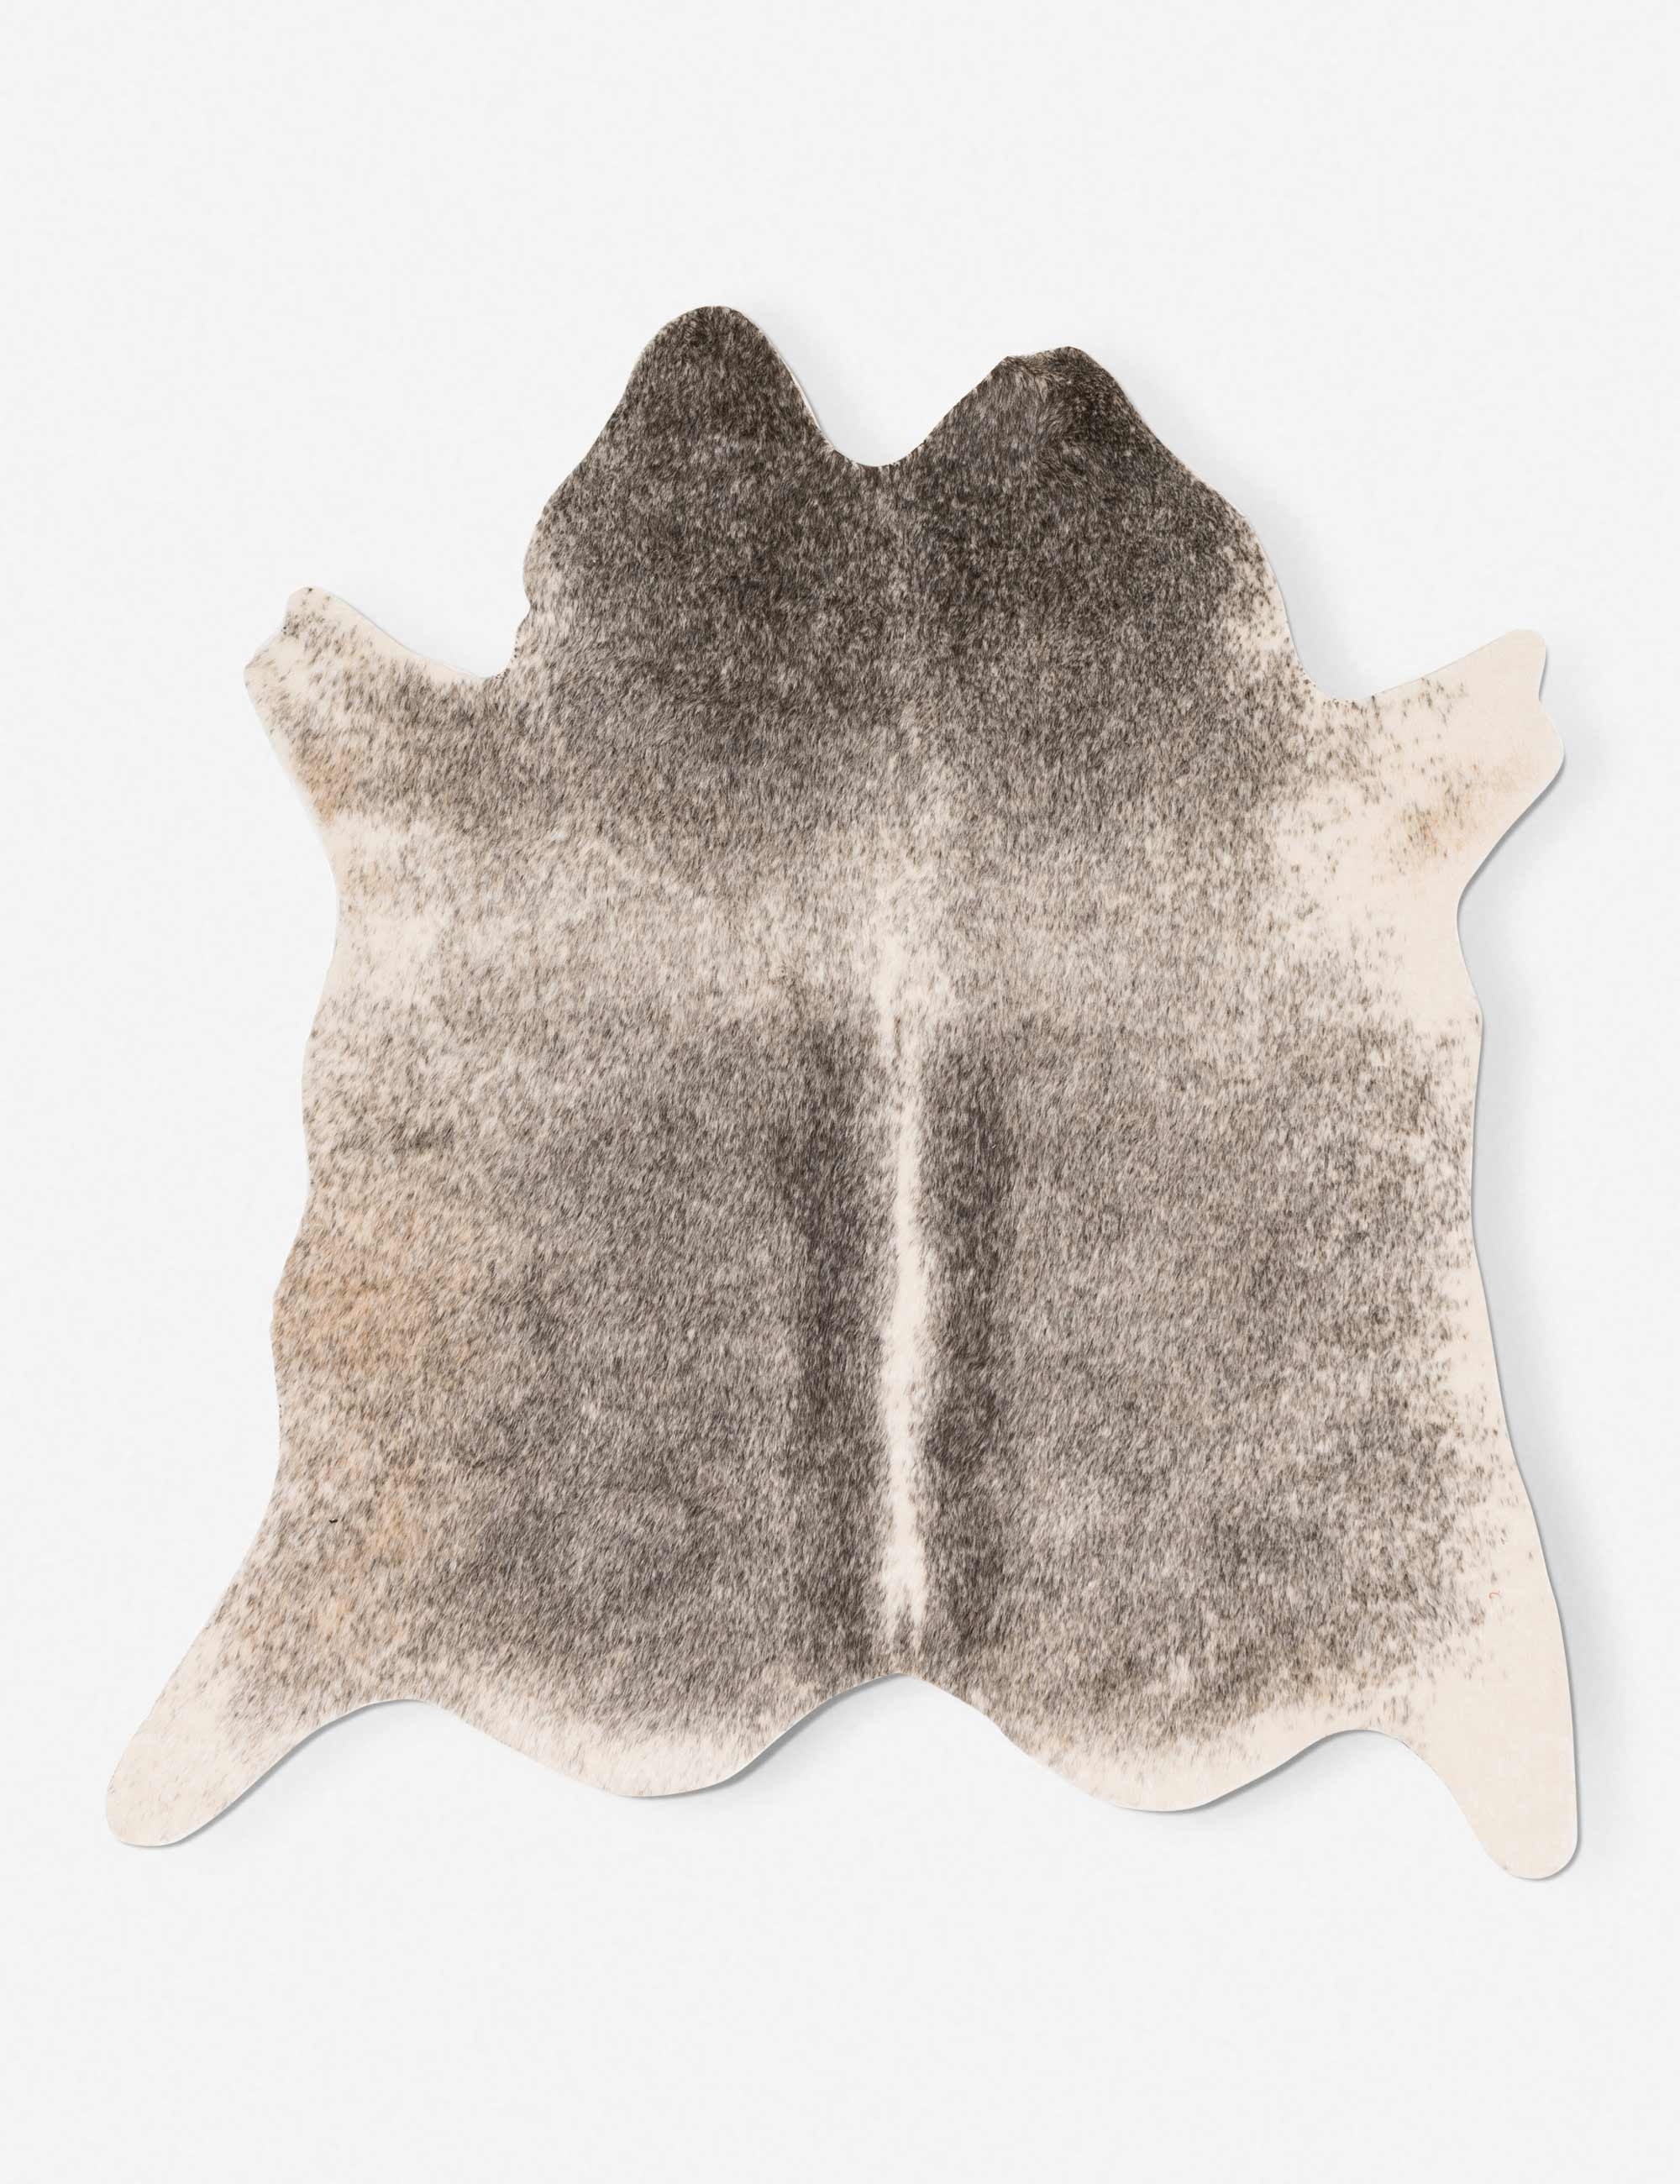 Winsley Faux Cowhide Rug, Ivory and Gray - Image 0